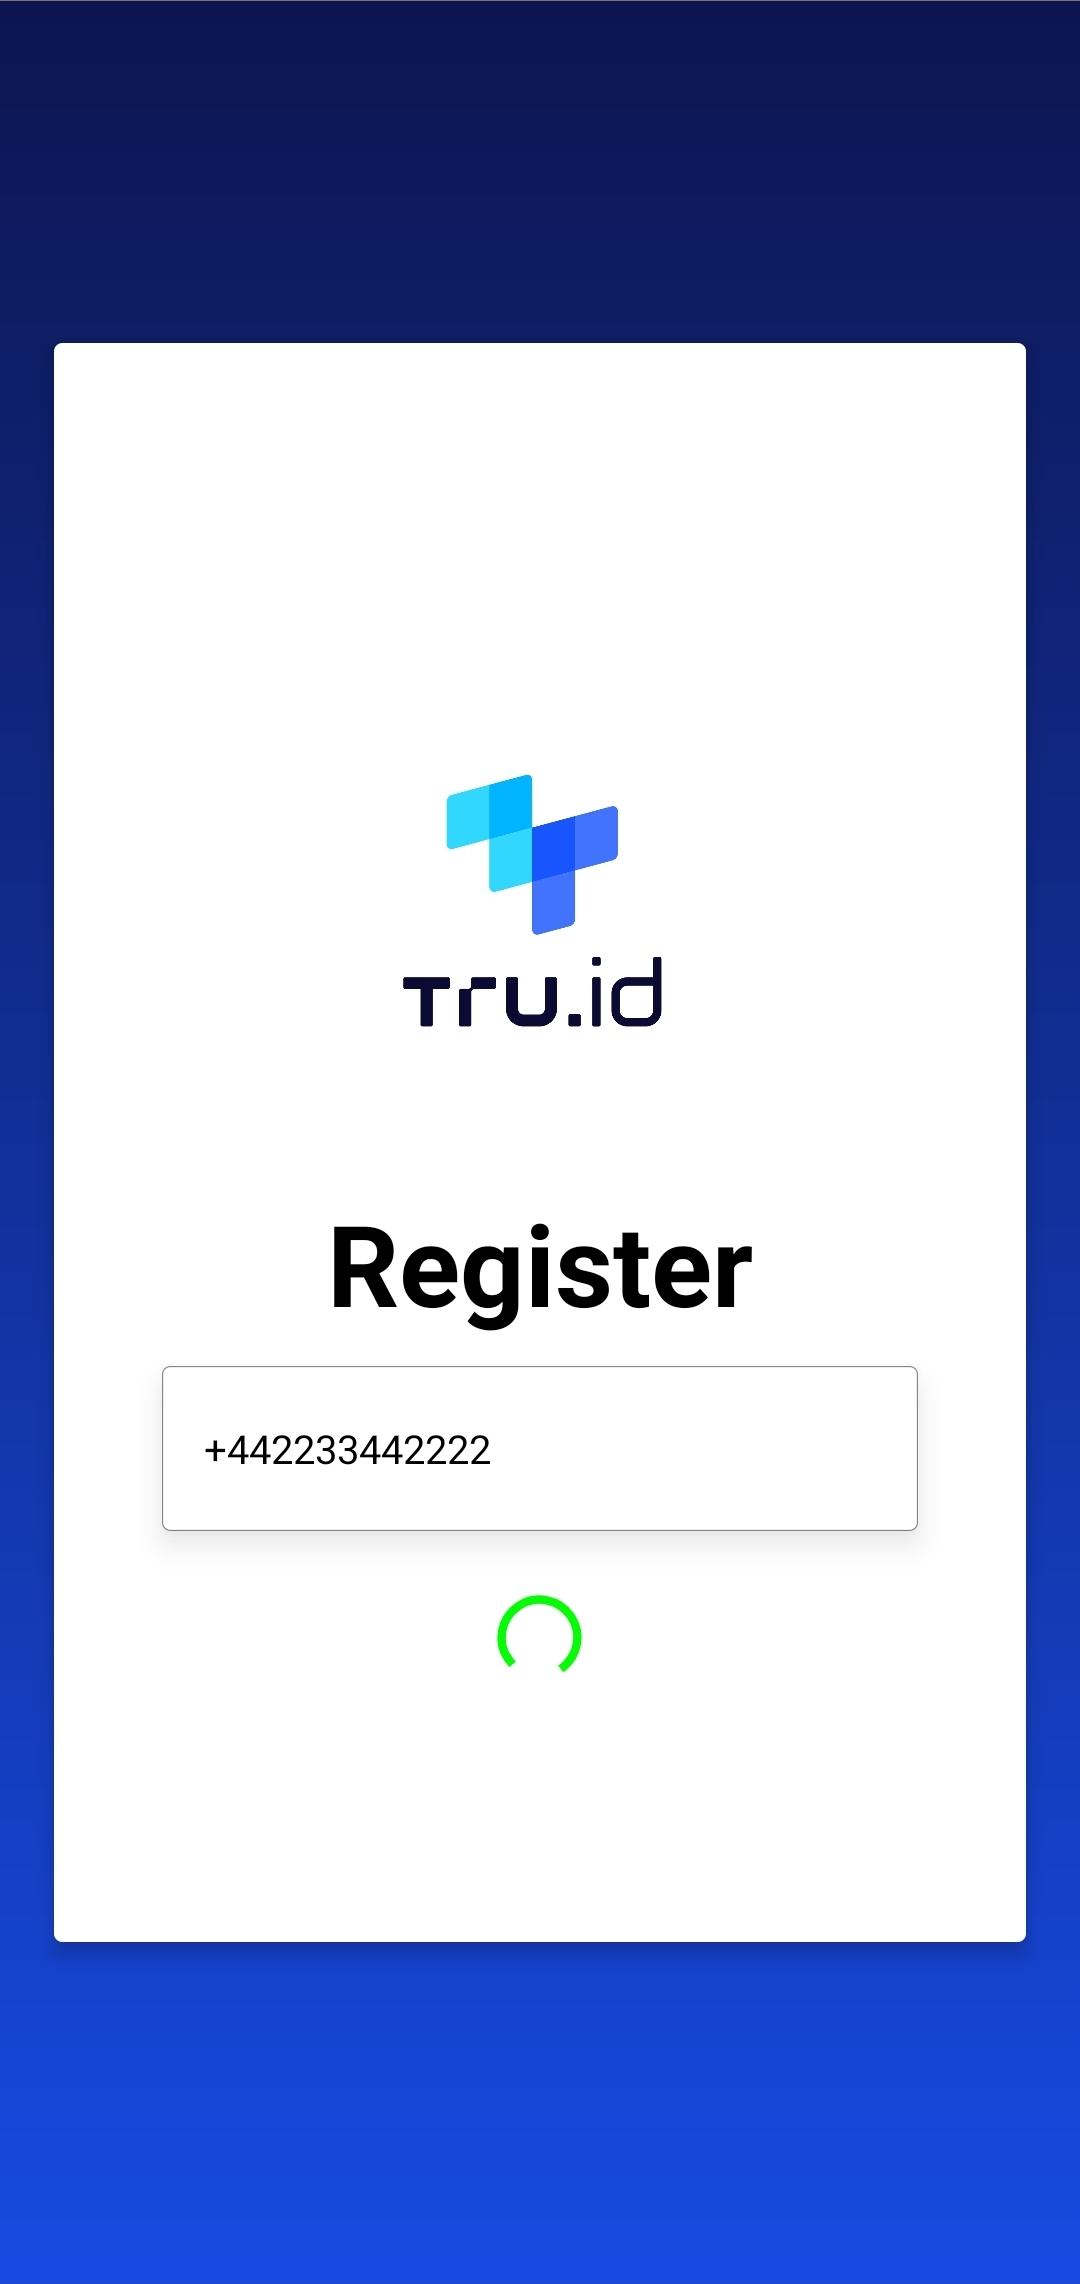 A tru.ID mobile app screen showing a blue background, smaller white box area with a tru.ID logo, a text box with a phone number in, and a loading indicator.